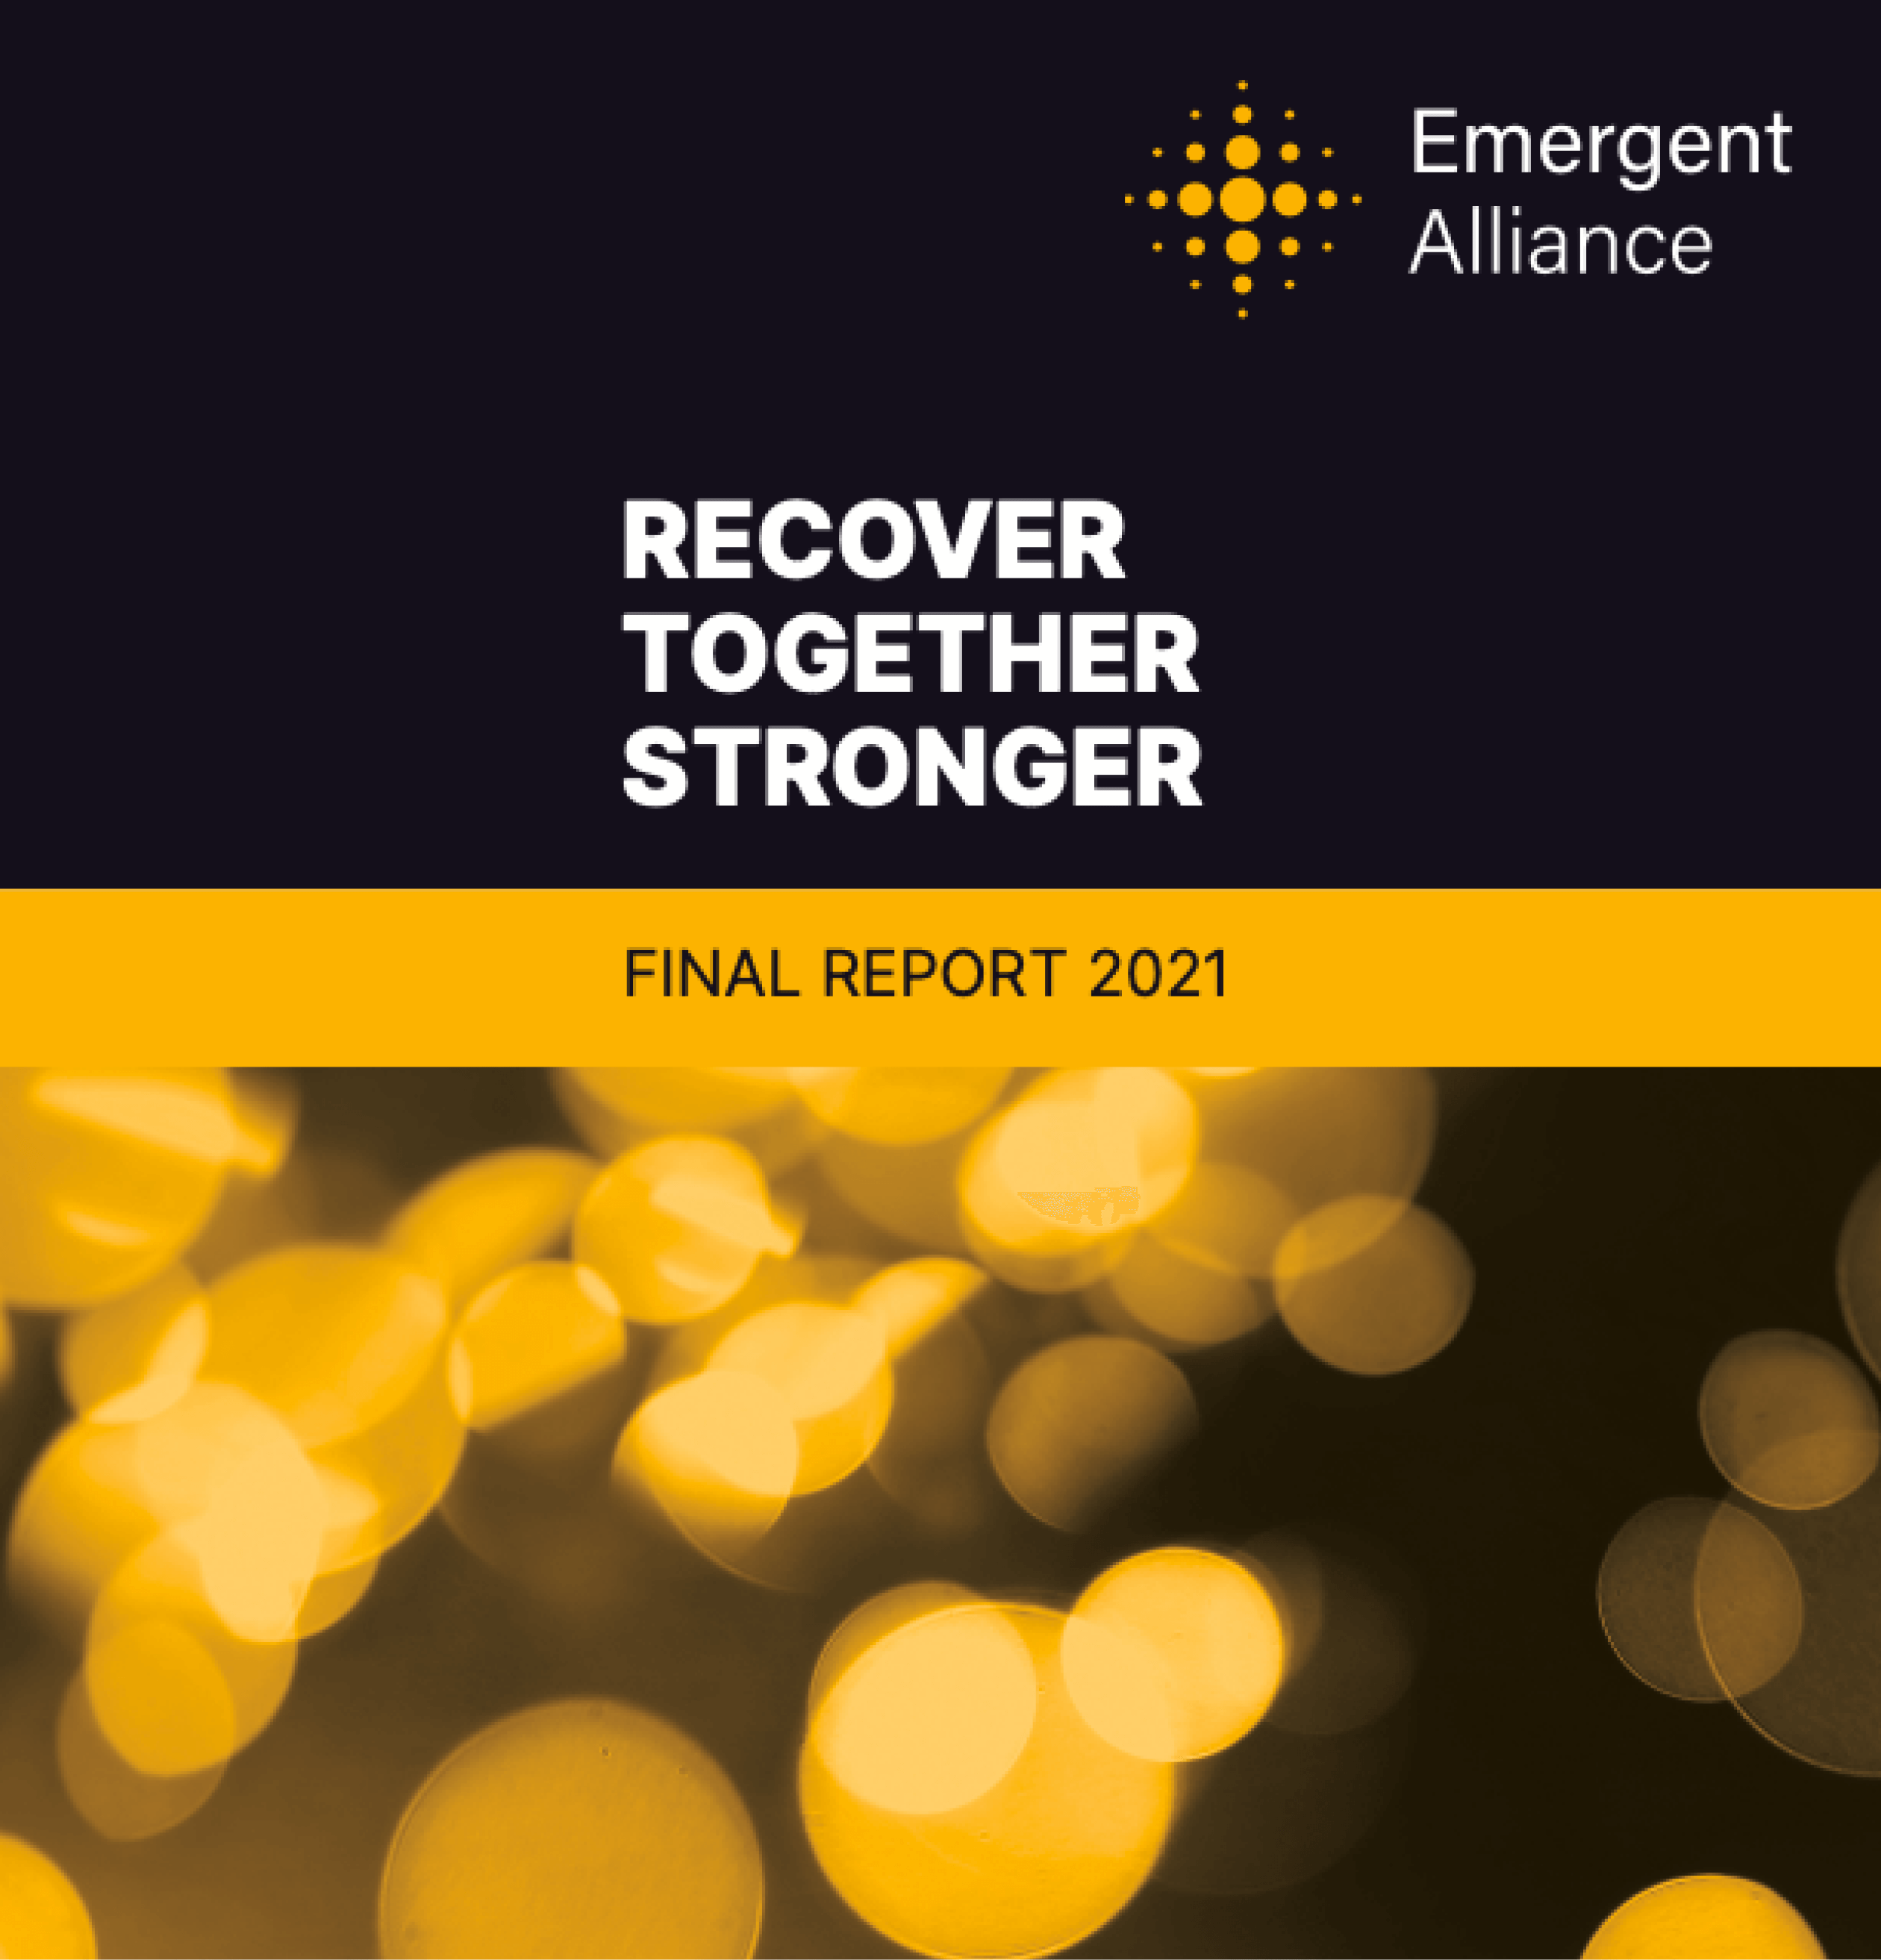 The Emergent Alliance Final report cover